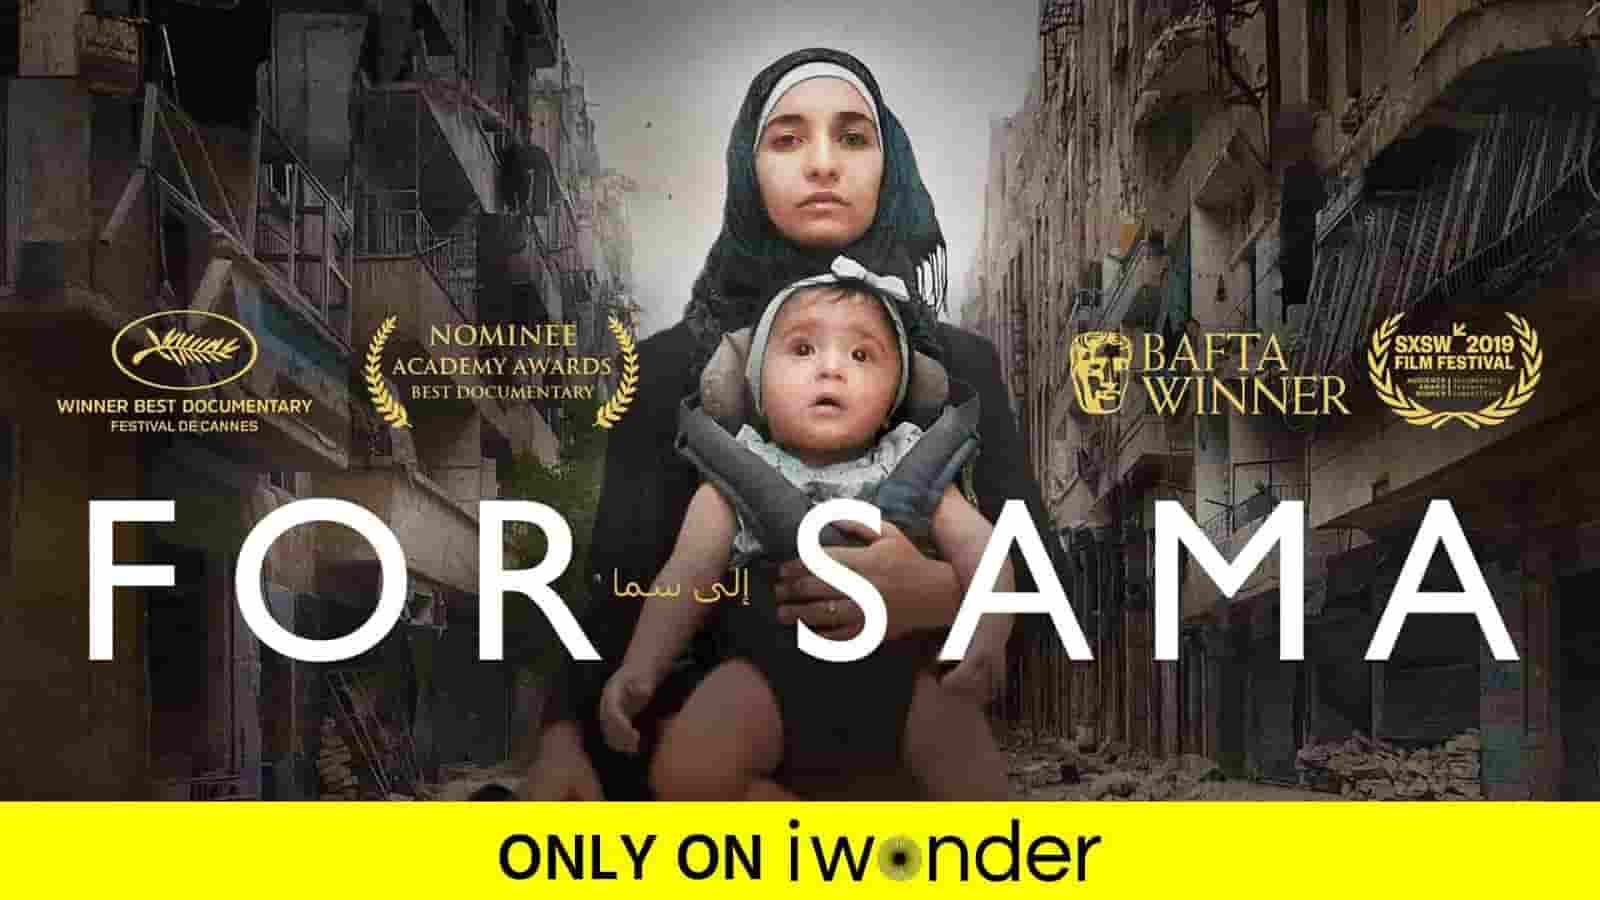 2020 Academy Award nominee 'For Sama' documentary now streaming only on iwonder